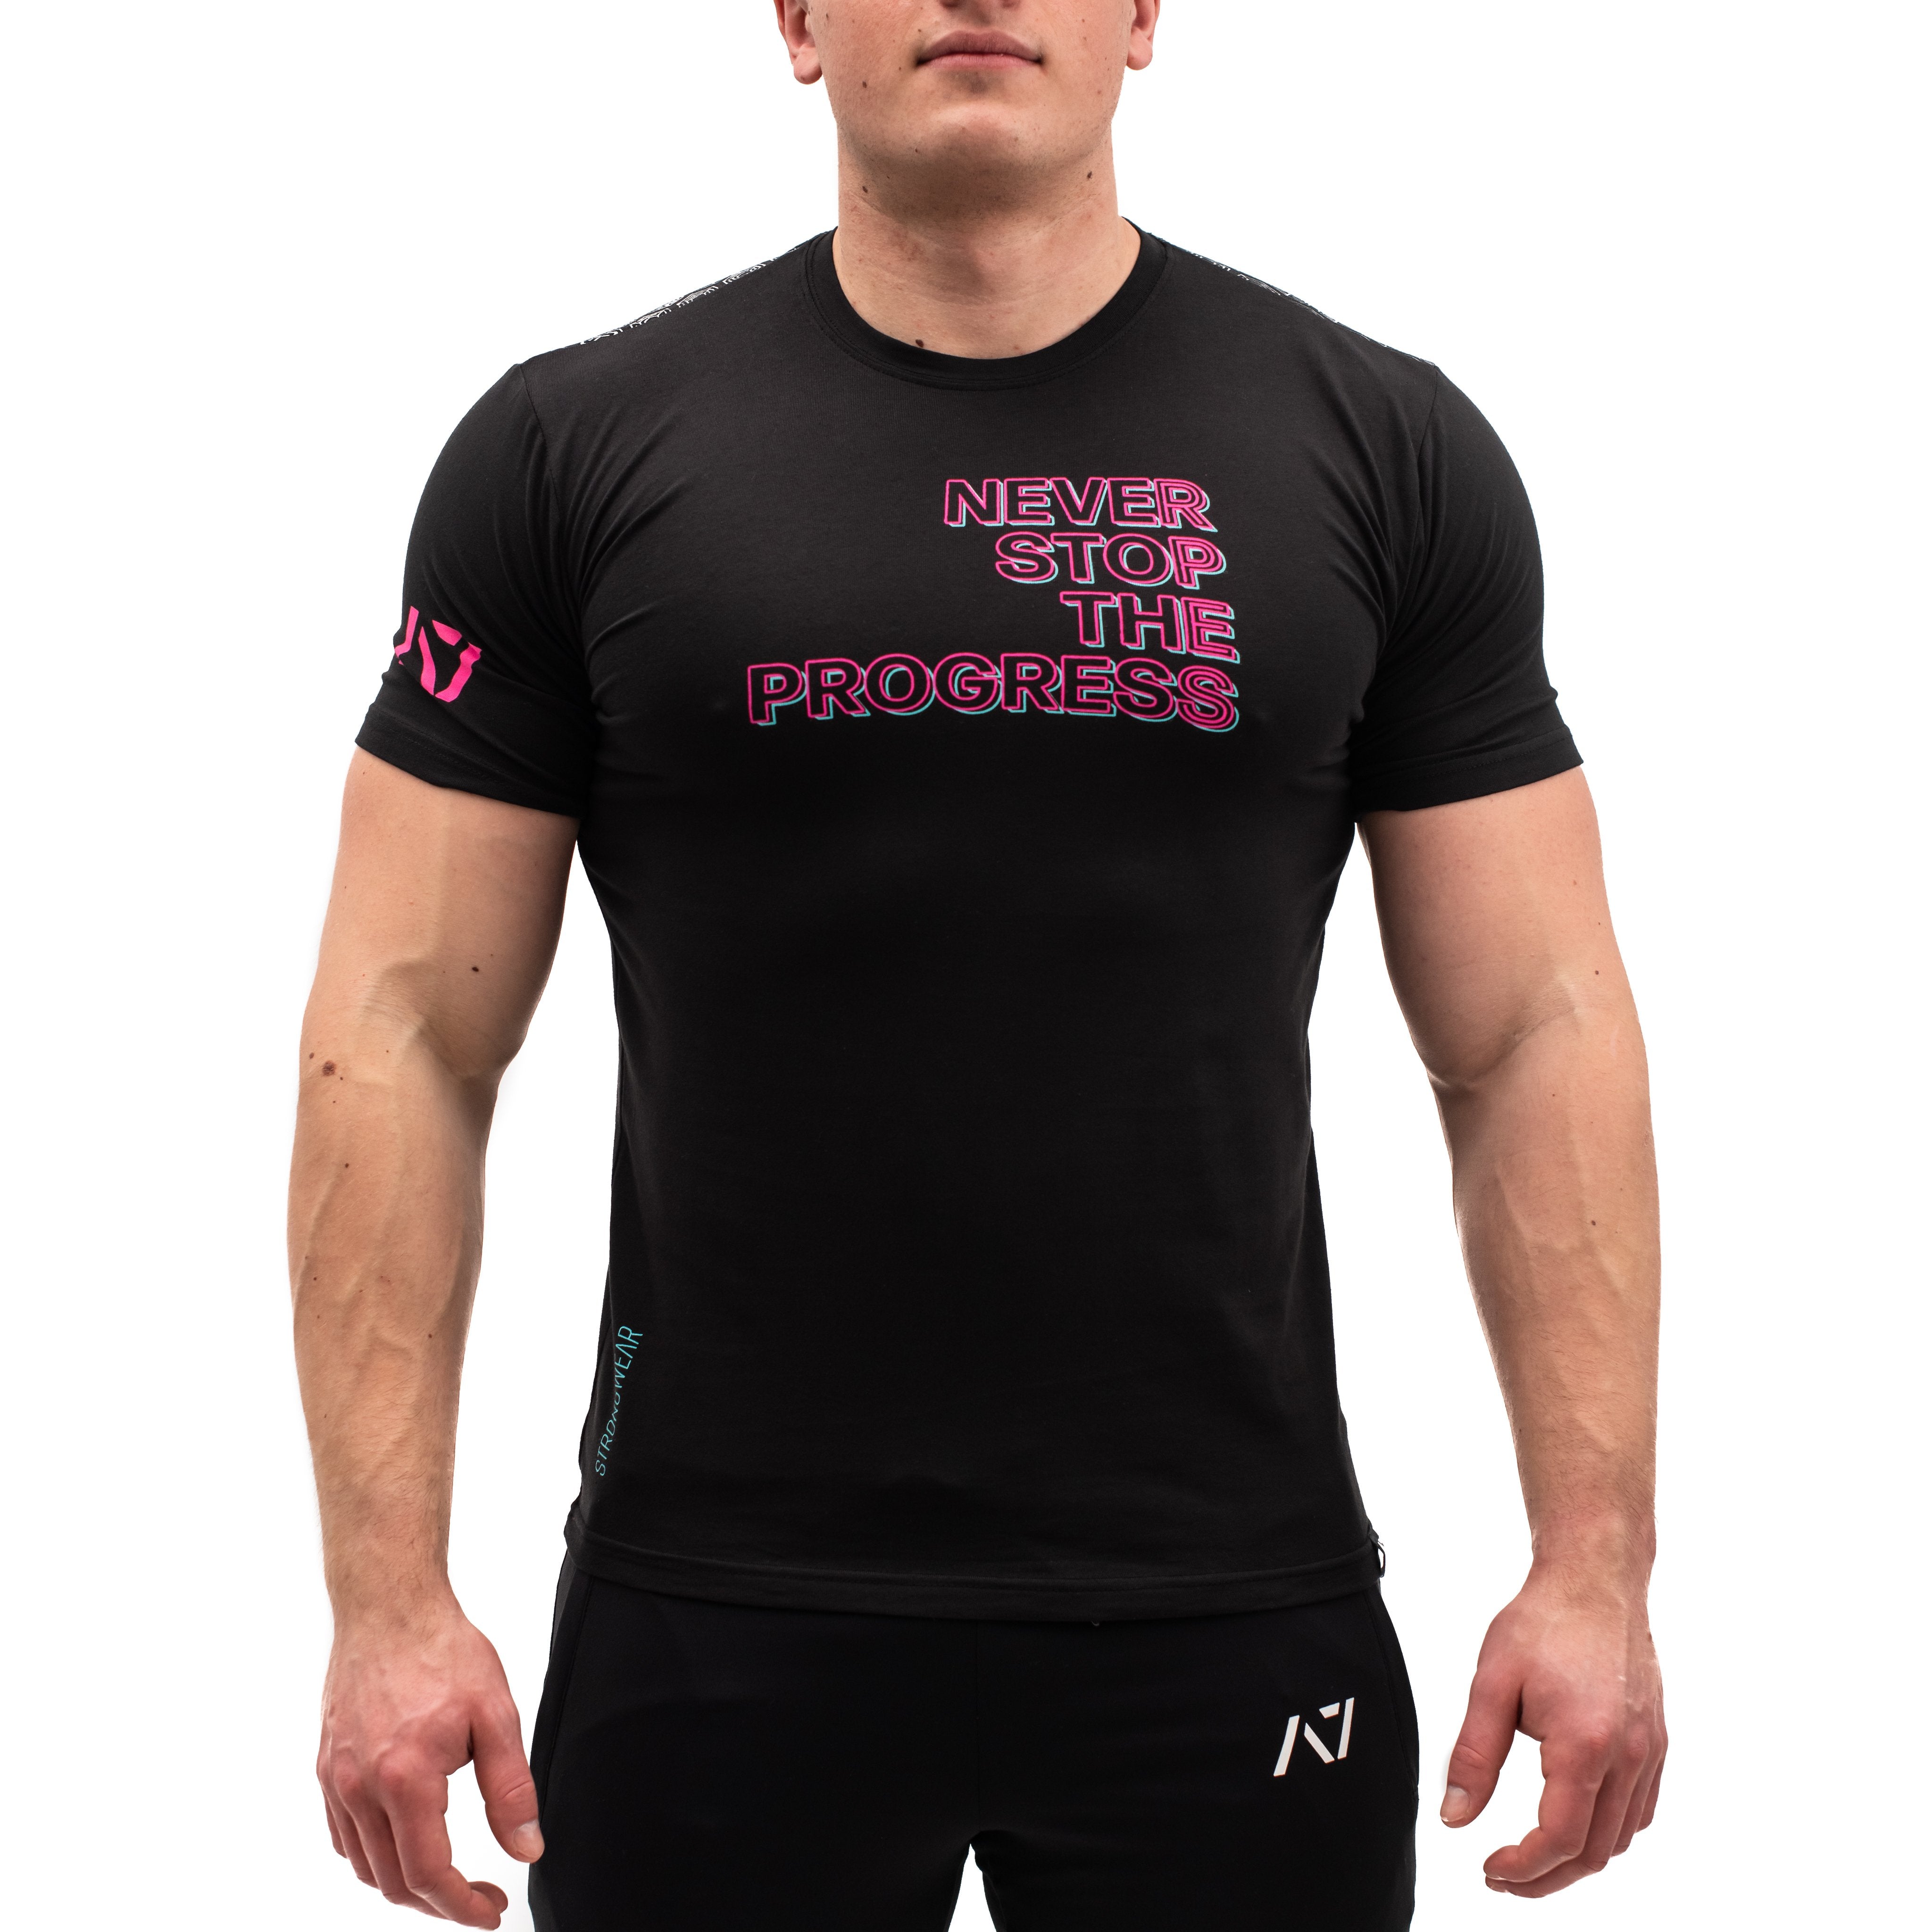 RPES Bar Grip T-shirt, great as a squat shirt. Purchase RPES Bar Grip tshirt UK from A7 UK. Purchase RPES Bar Grip Shirt in Europe from A7 UK. No more chalk and no more sliding. Best Bar Grip Tshirts, shipping to UK and Europe from A7 UK. RPES is our classic black on black shirt design! The best Powerlifting apparel for all your workouts. Available in UK and Europe including France, Italy, Germany, Sweden and Poland